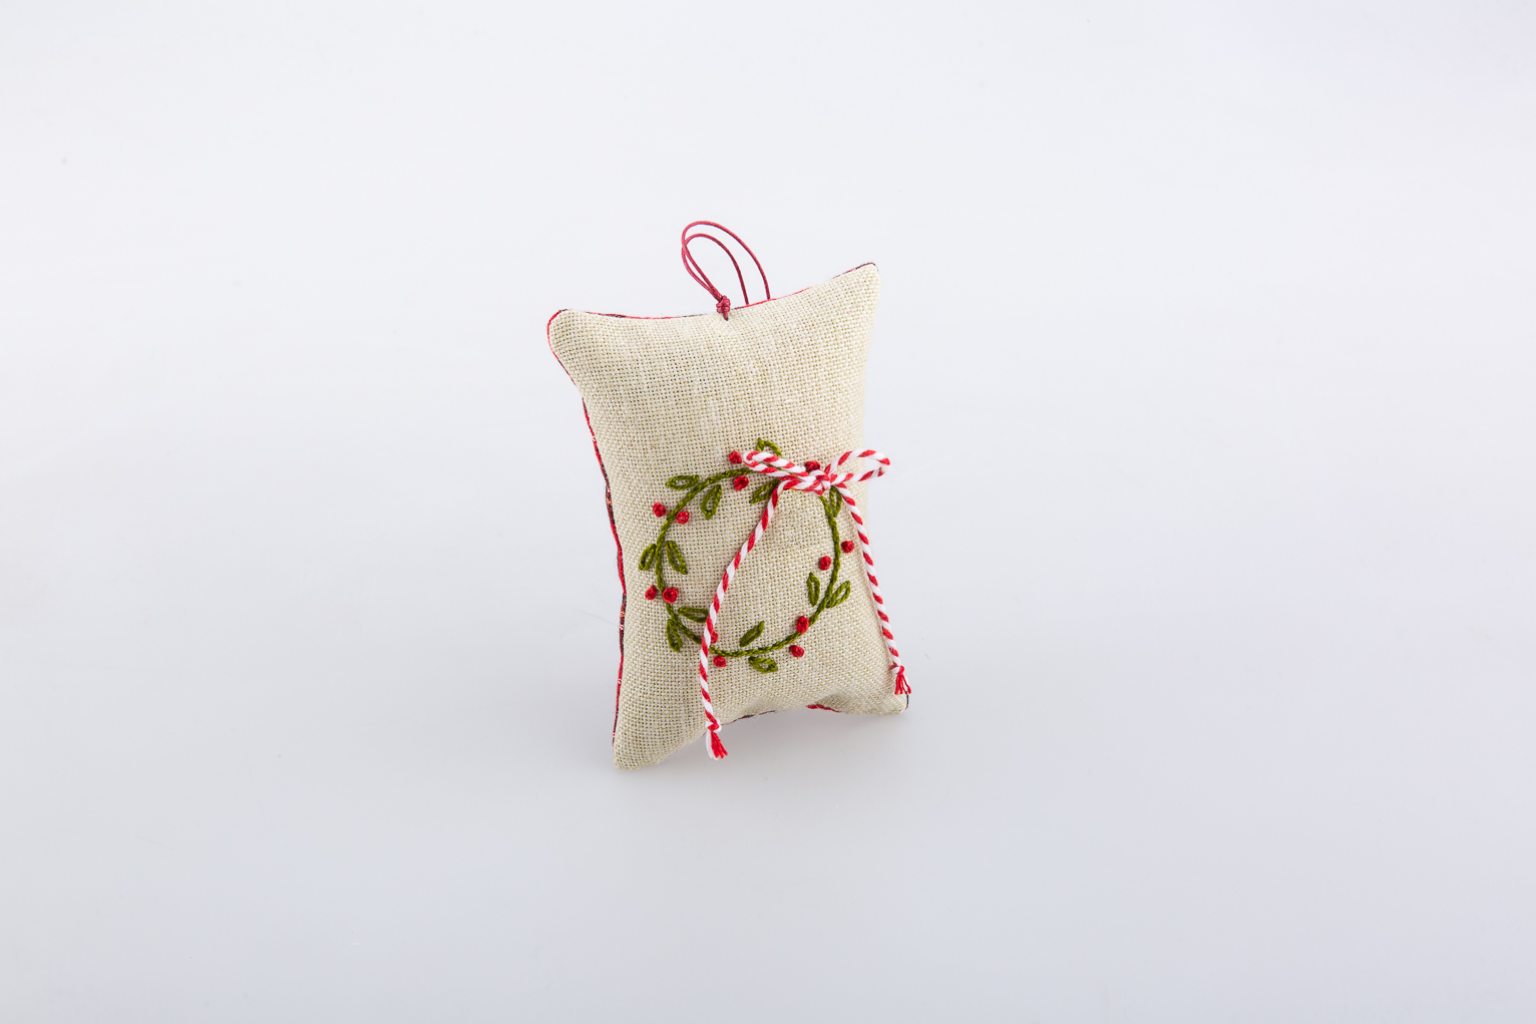 Hand-embroidered lucky-charm with wreath